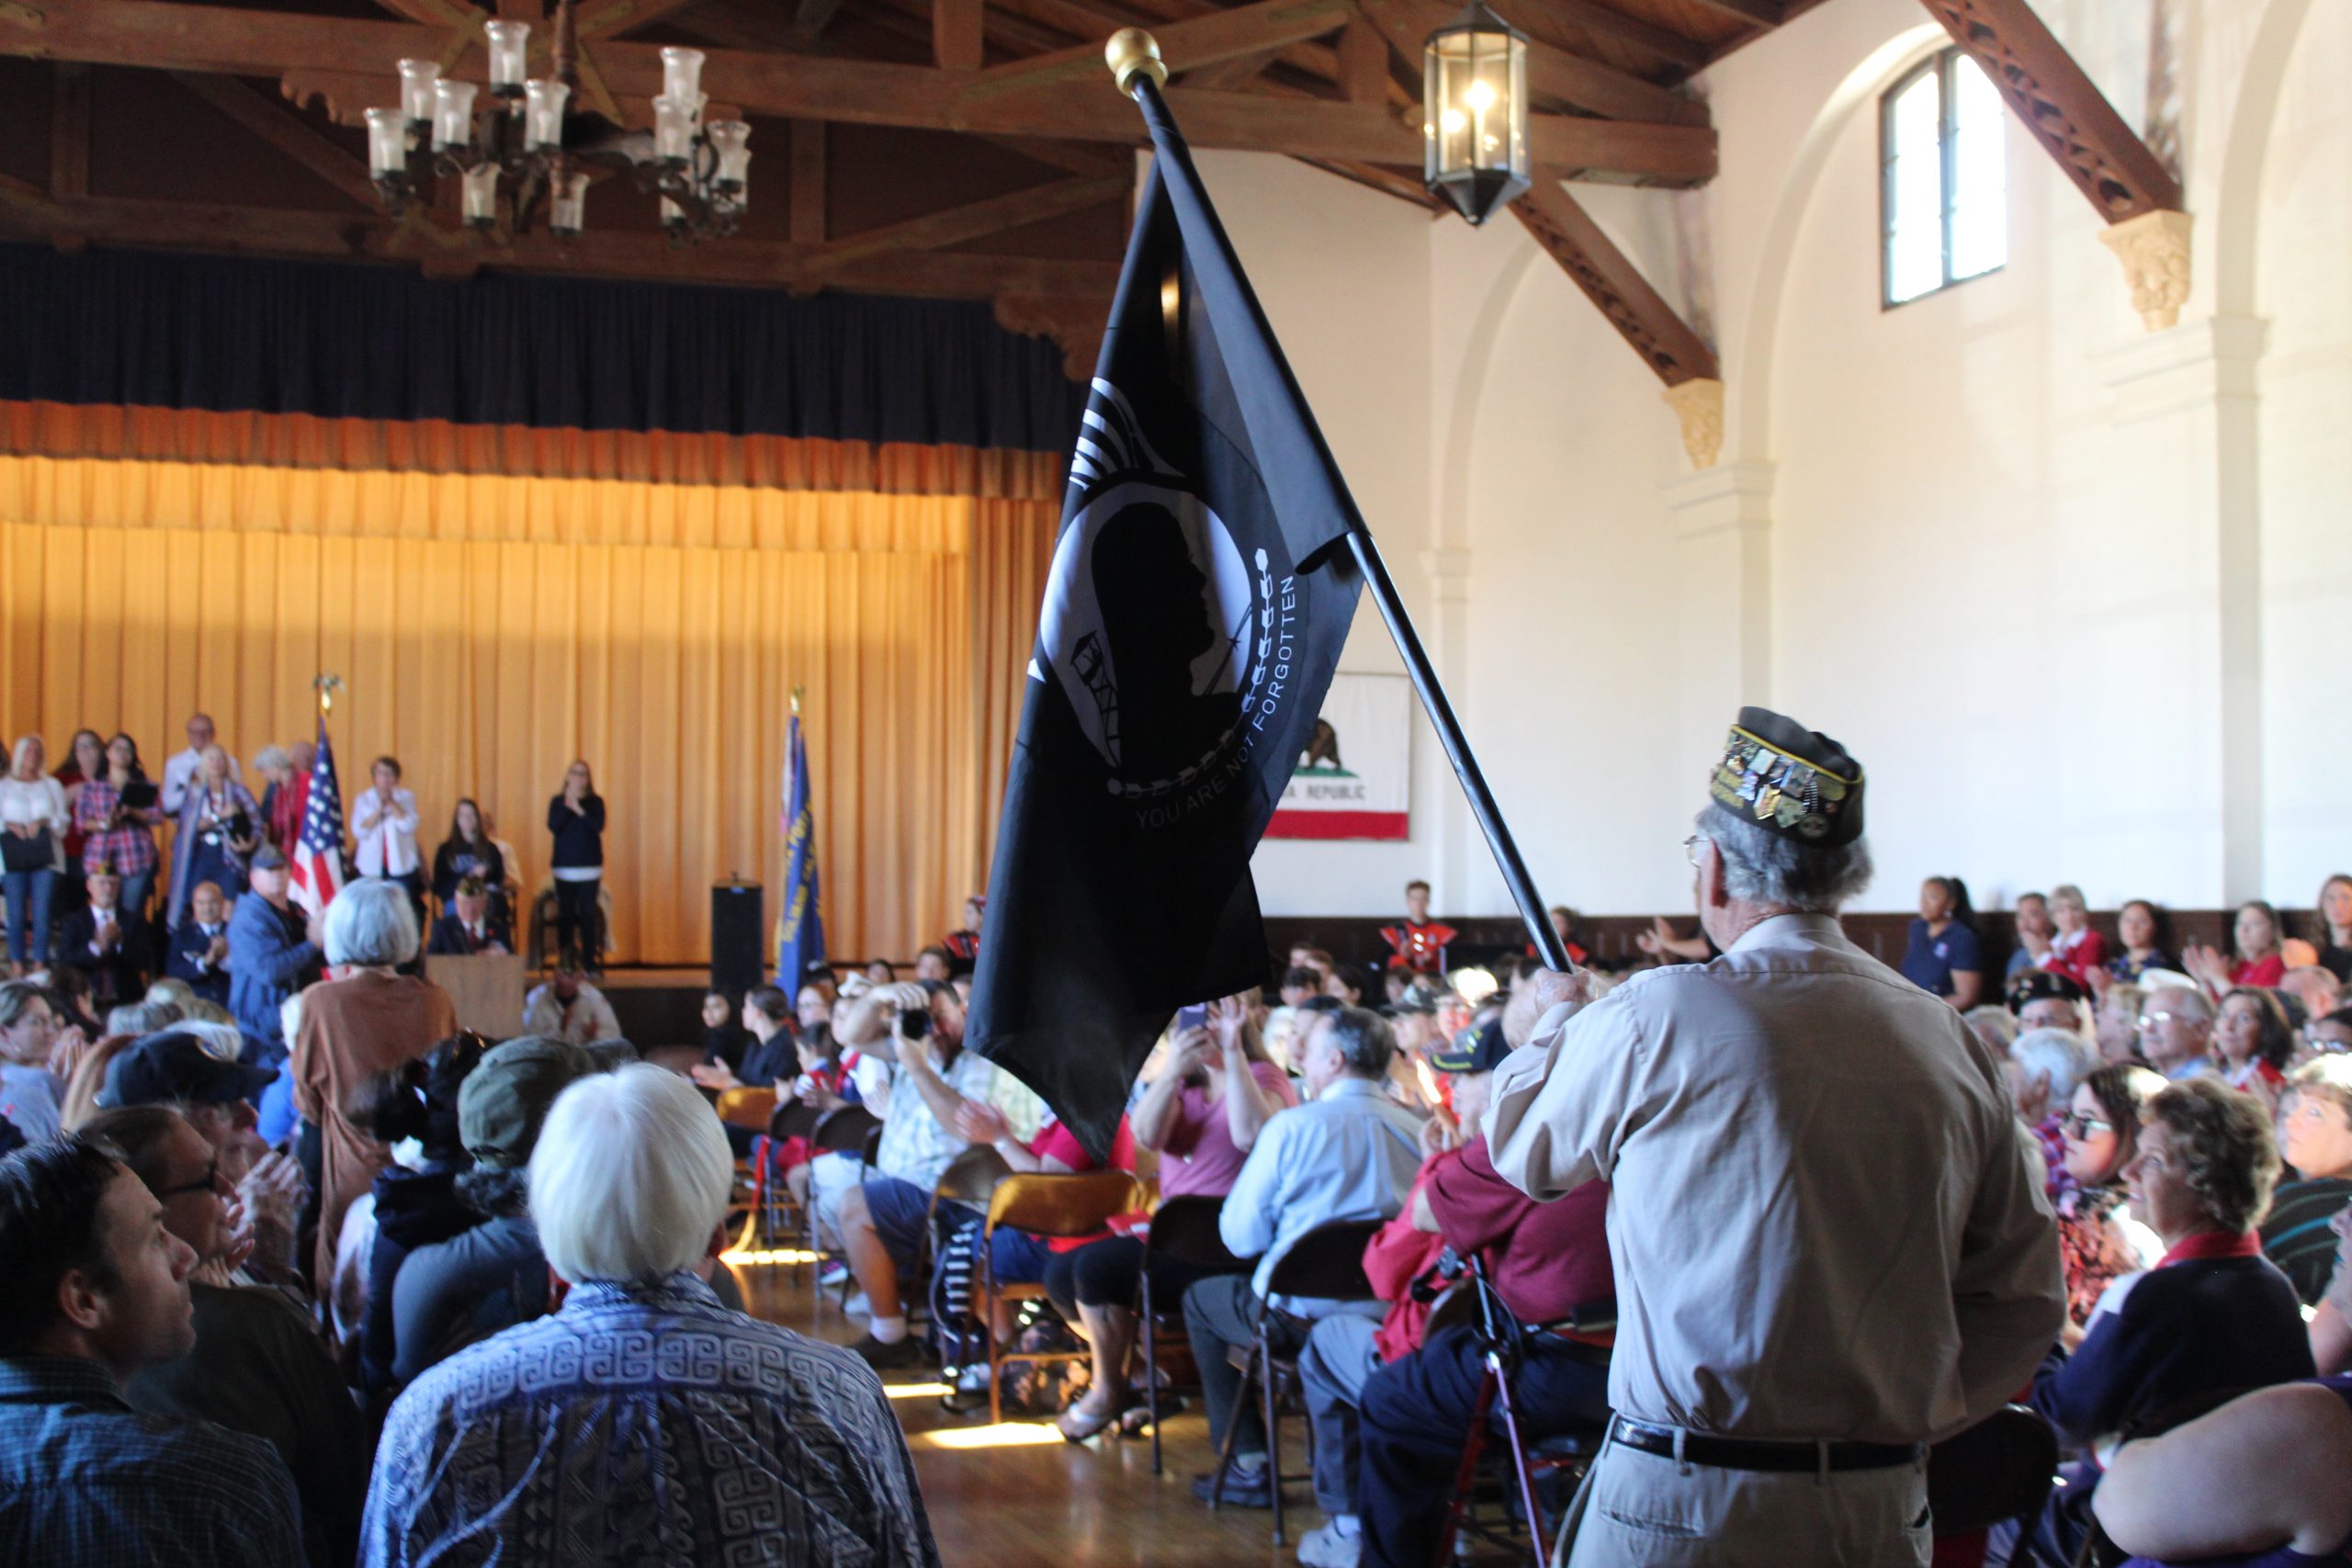 Veterans Day to honor local vets along with a new event in Santa Ynez